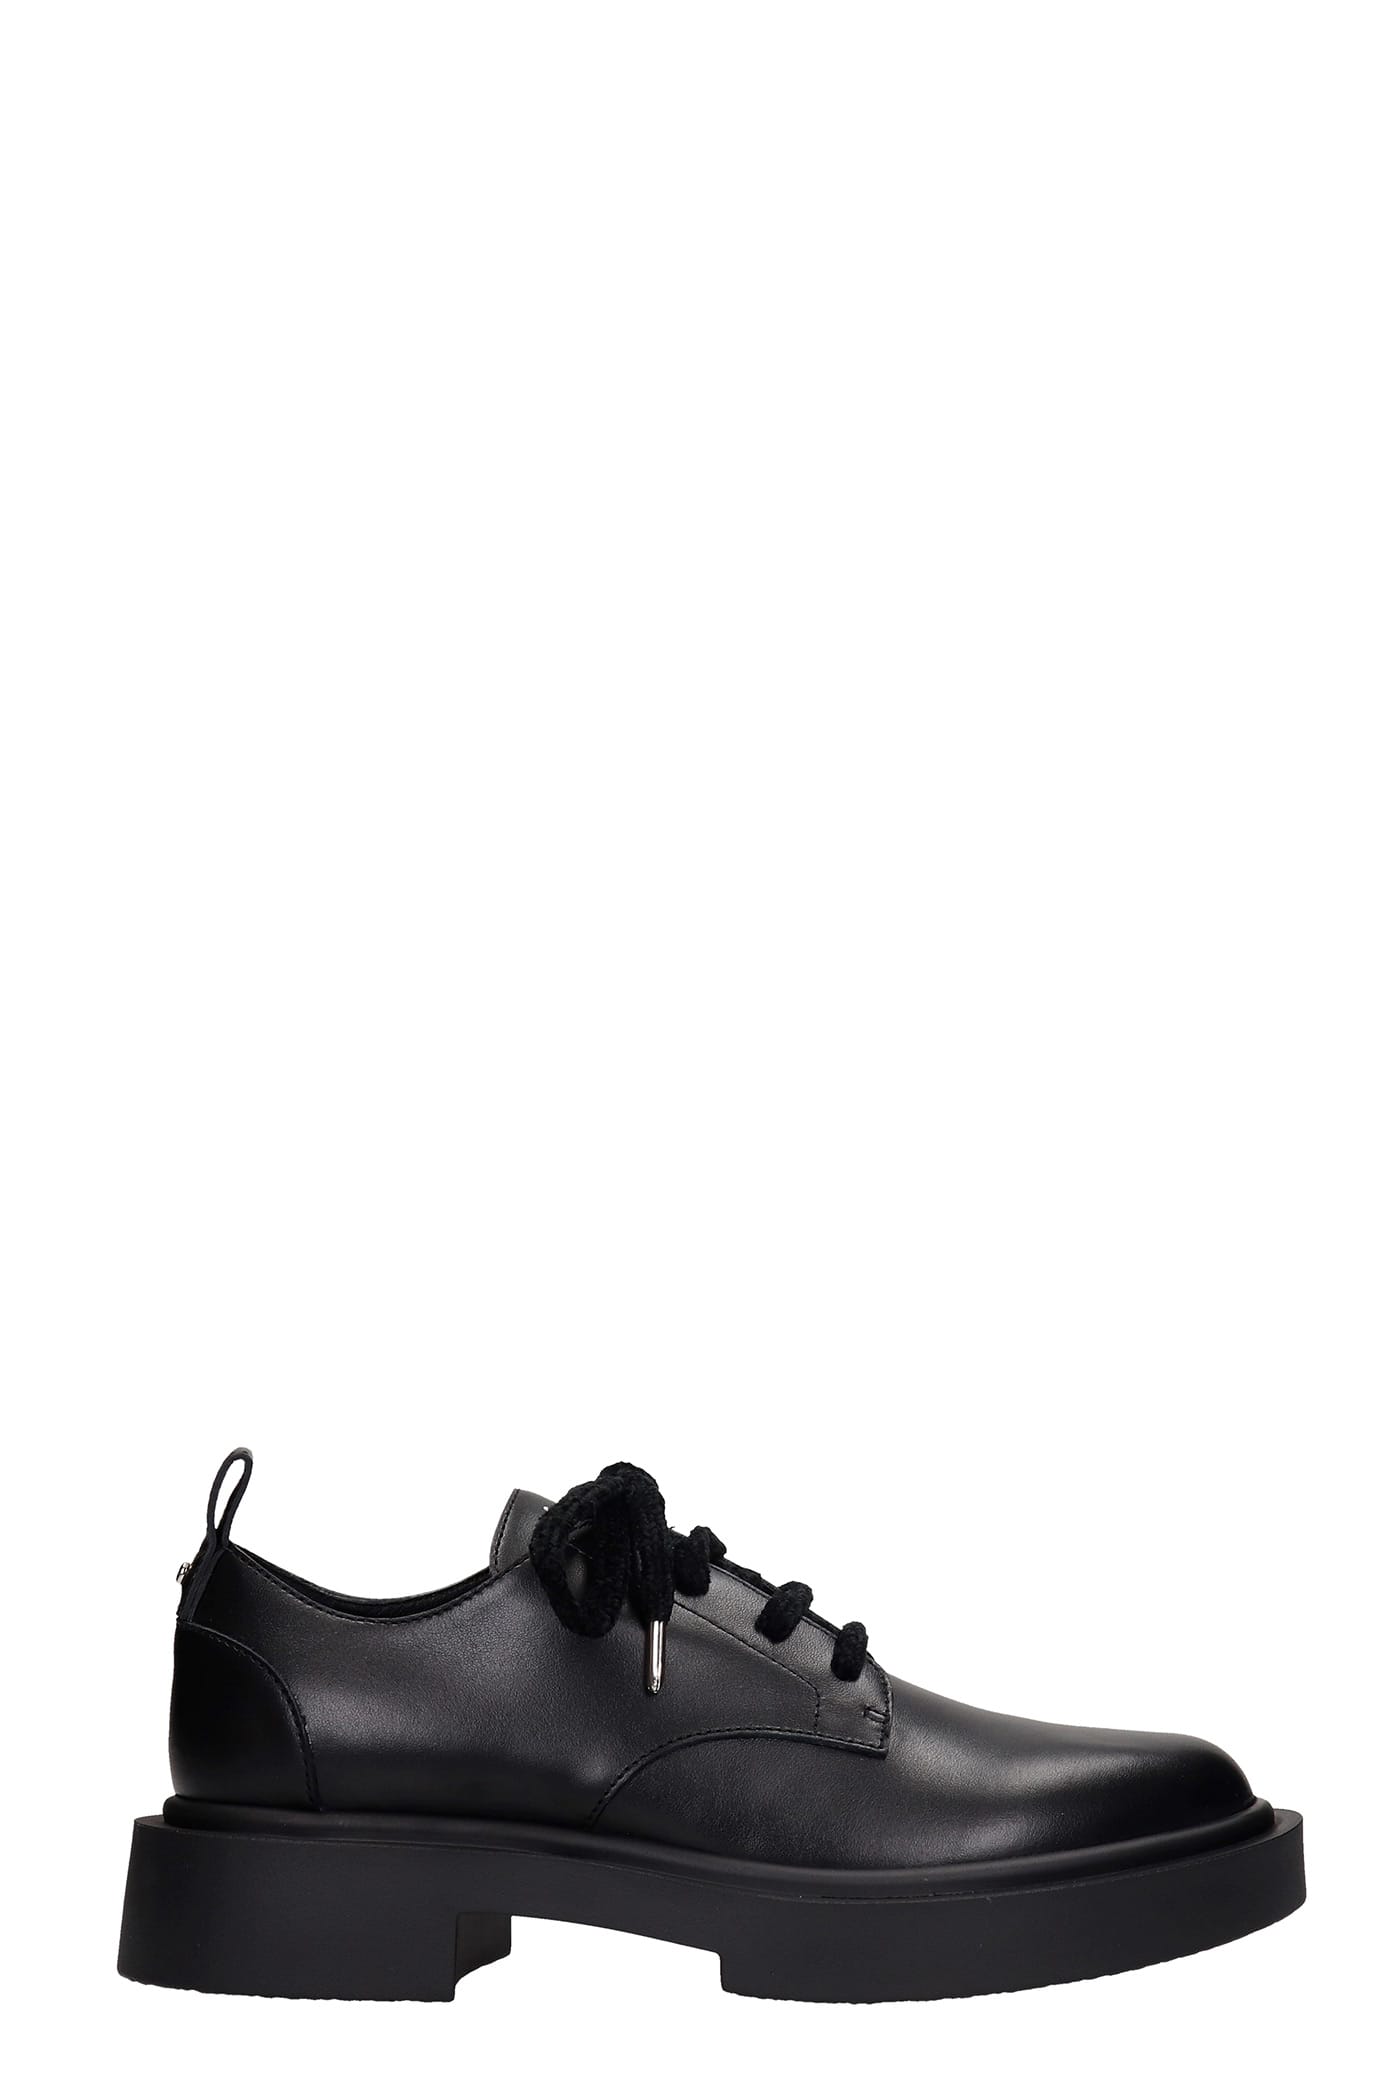 Giuseppe Zanotti Achille Lace Up Shoes In Black Leather